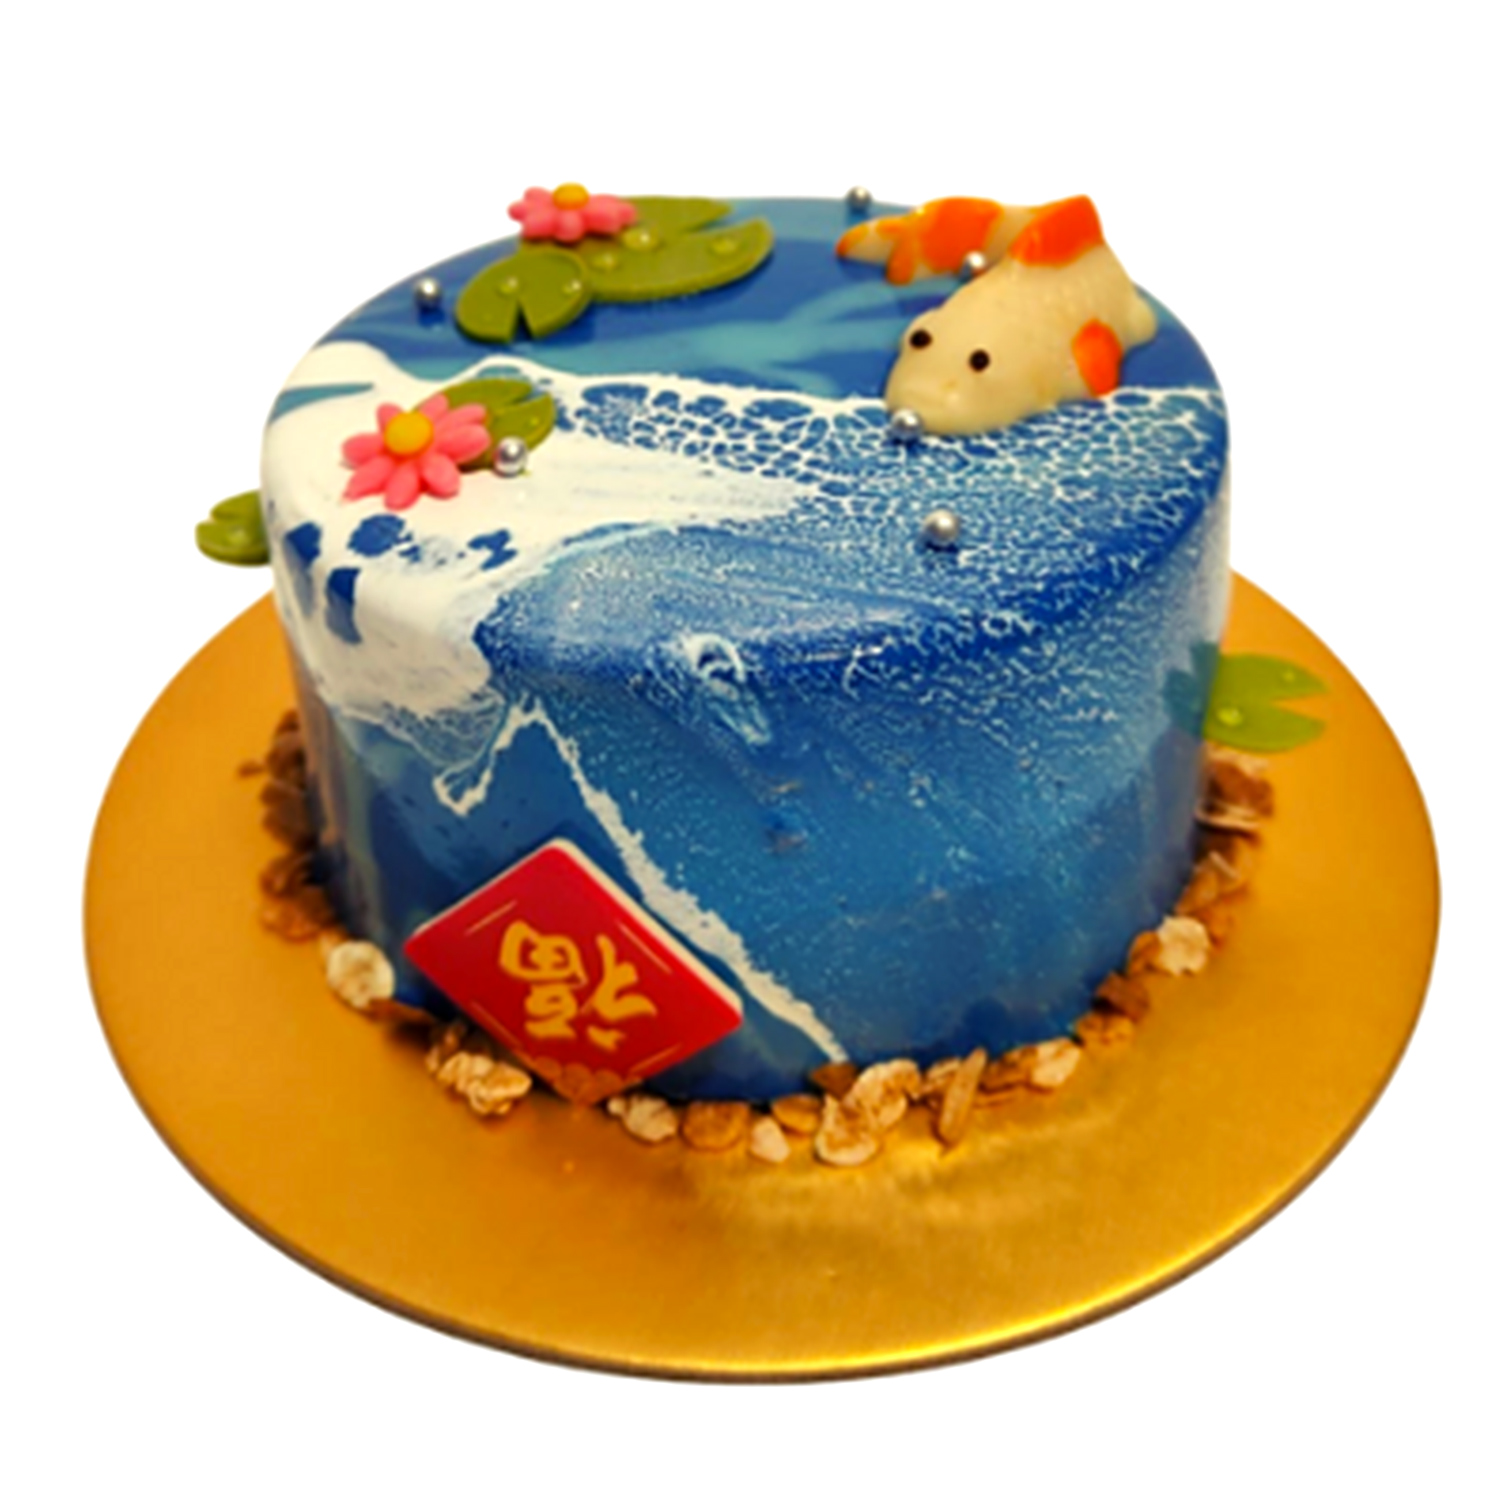 Online Auspicious Koi Pond Cake Gift Delivery In Singapore Fnp